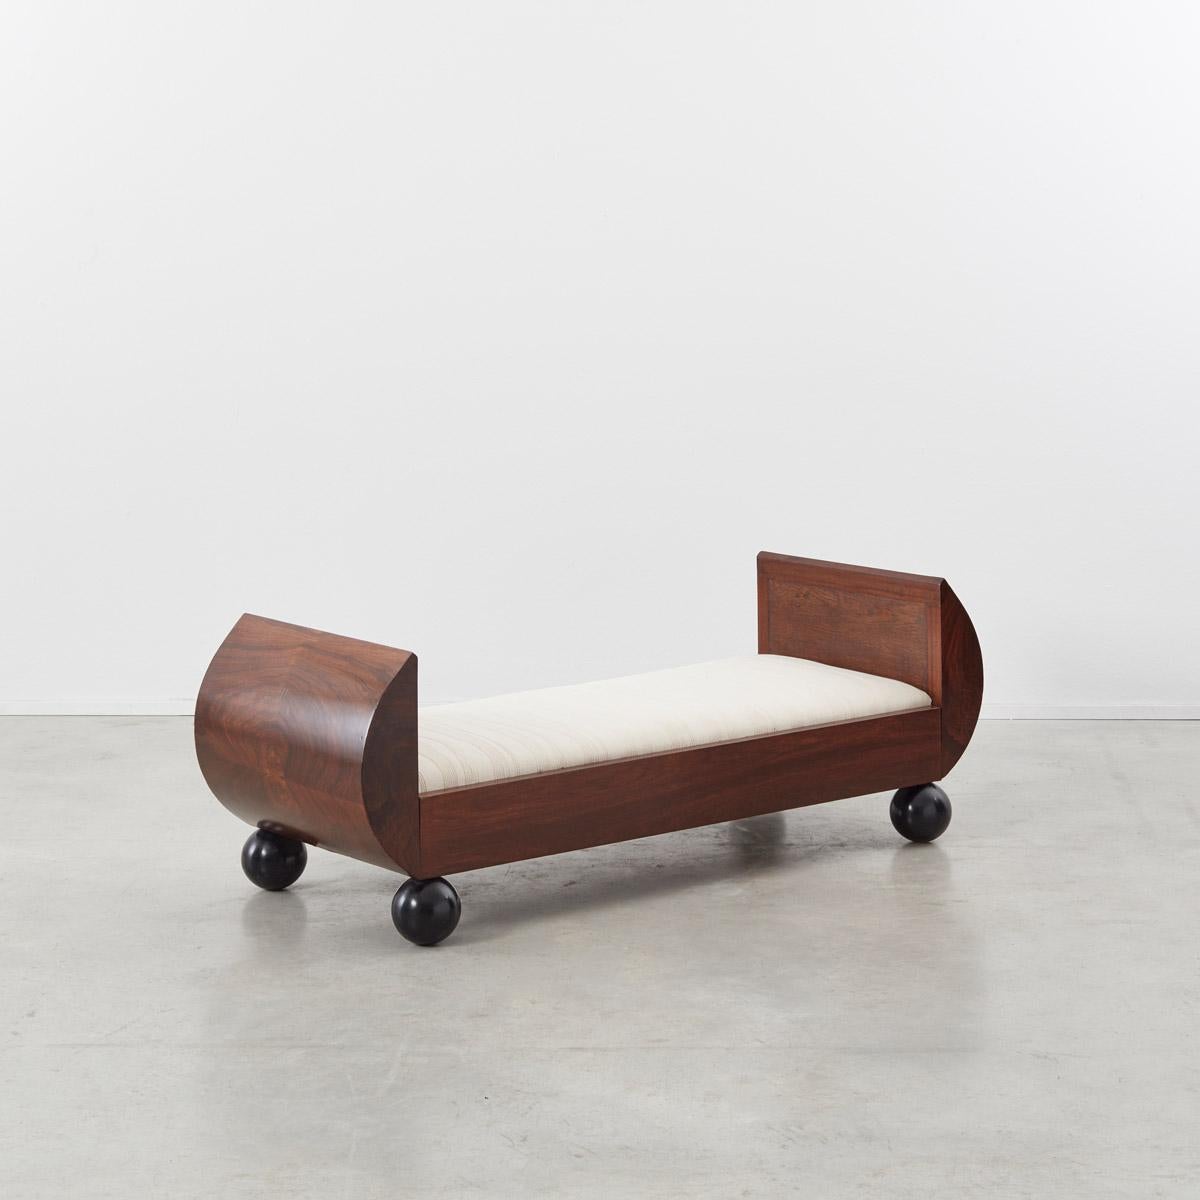 This beautiful 1930s Art Deco upholstered bench has a simple stylized form. The piece is comprised of bold geometries typical of the era yet displays a muted palette straying from the prevalent decorative trends of the time. The upholstered seat,